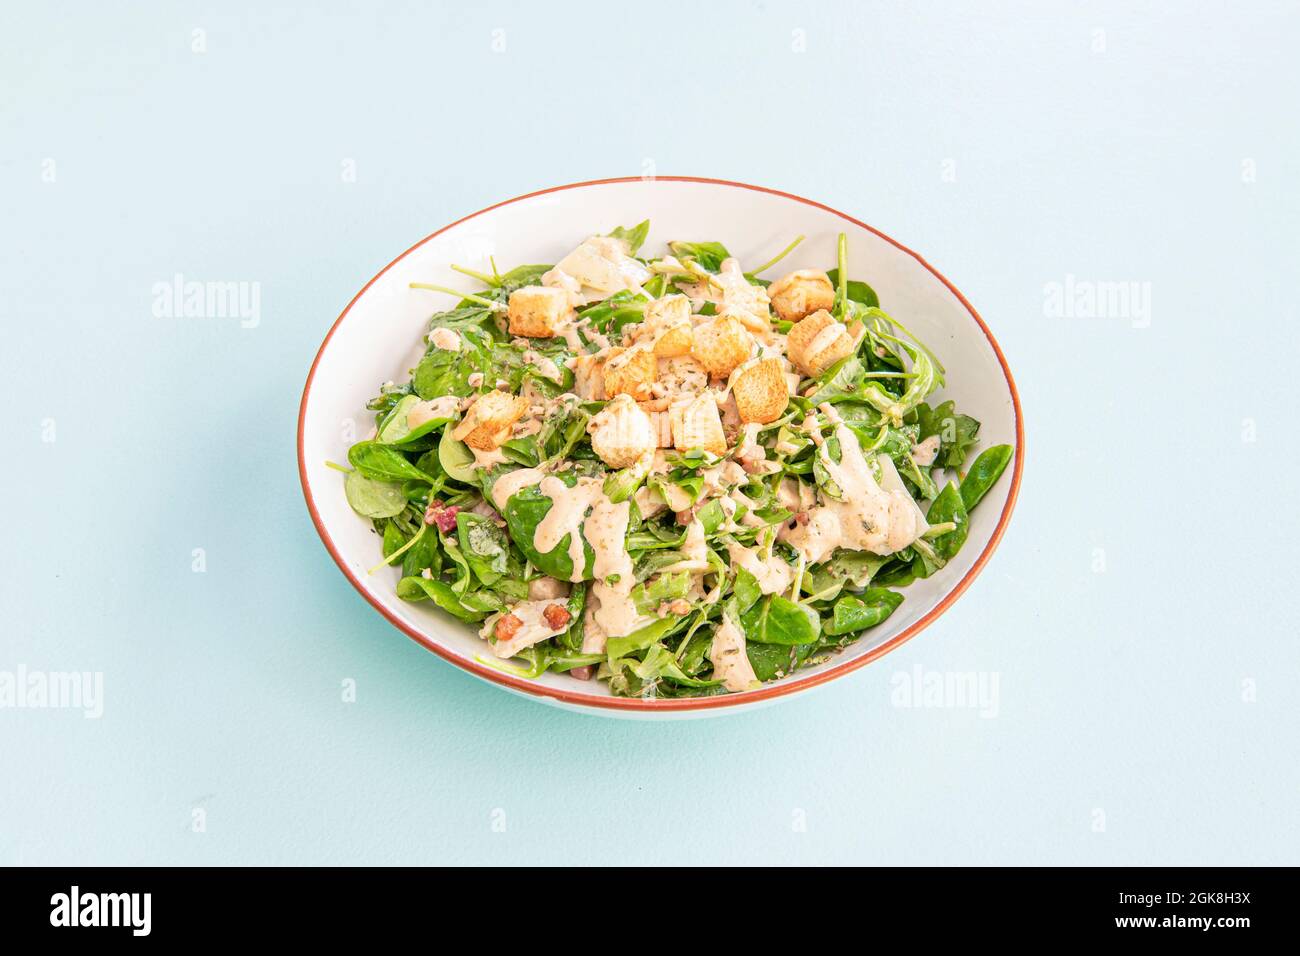 Bowl of caesar salad with lamb's lettuce, croutons, dried fruits and mayonnaise on blue background Stock Photo